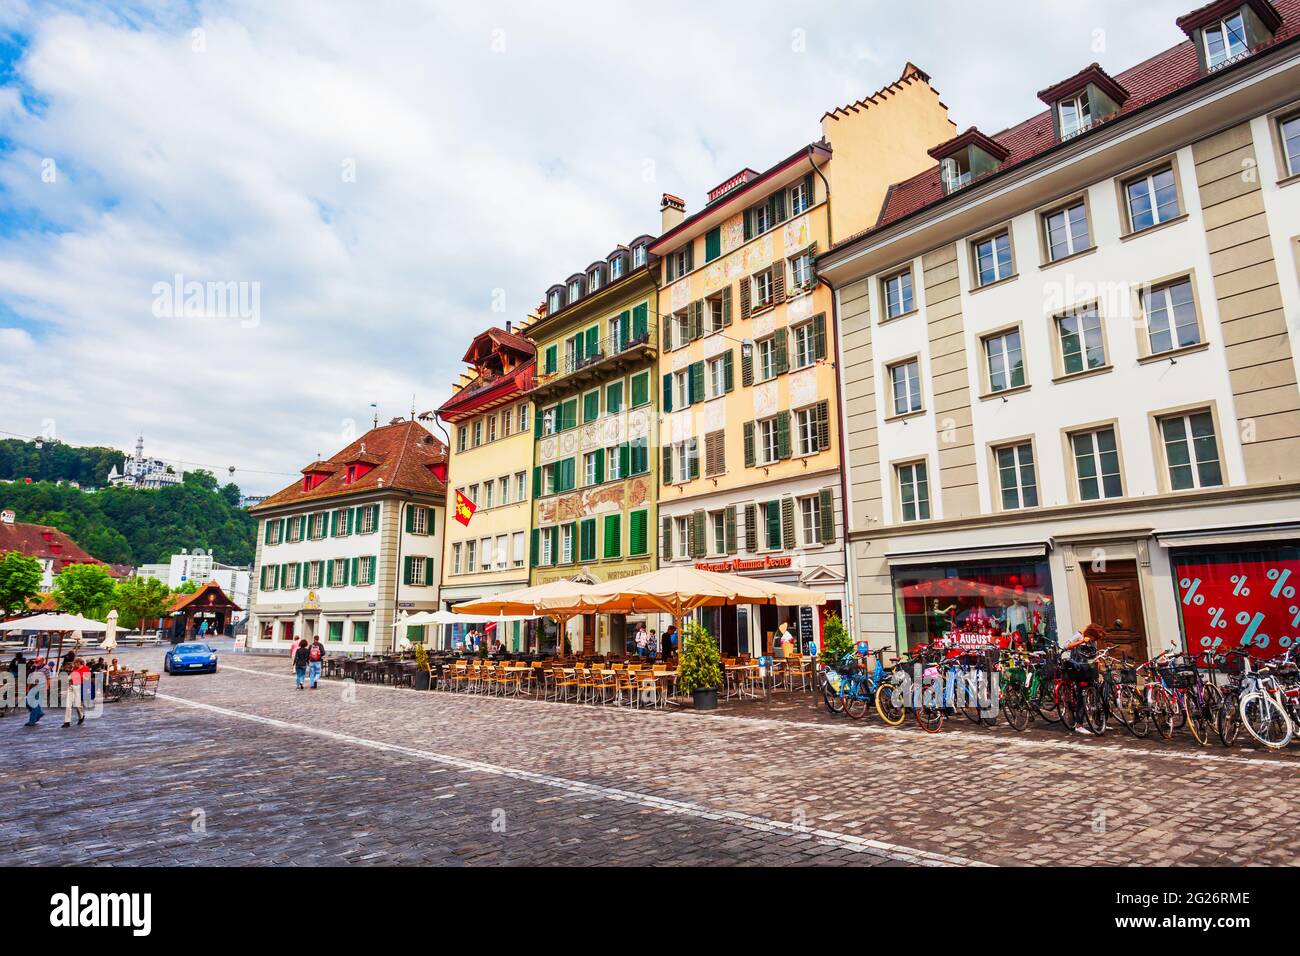 LUZERN, SWITZERLAND - JULY 12, 2019: Street with colorful local style houses in Lucerne. Lucerne or Luzern is a city in central Switzerland. Stock Photo